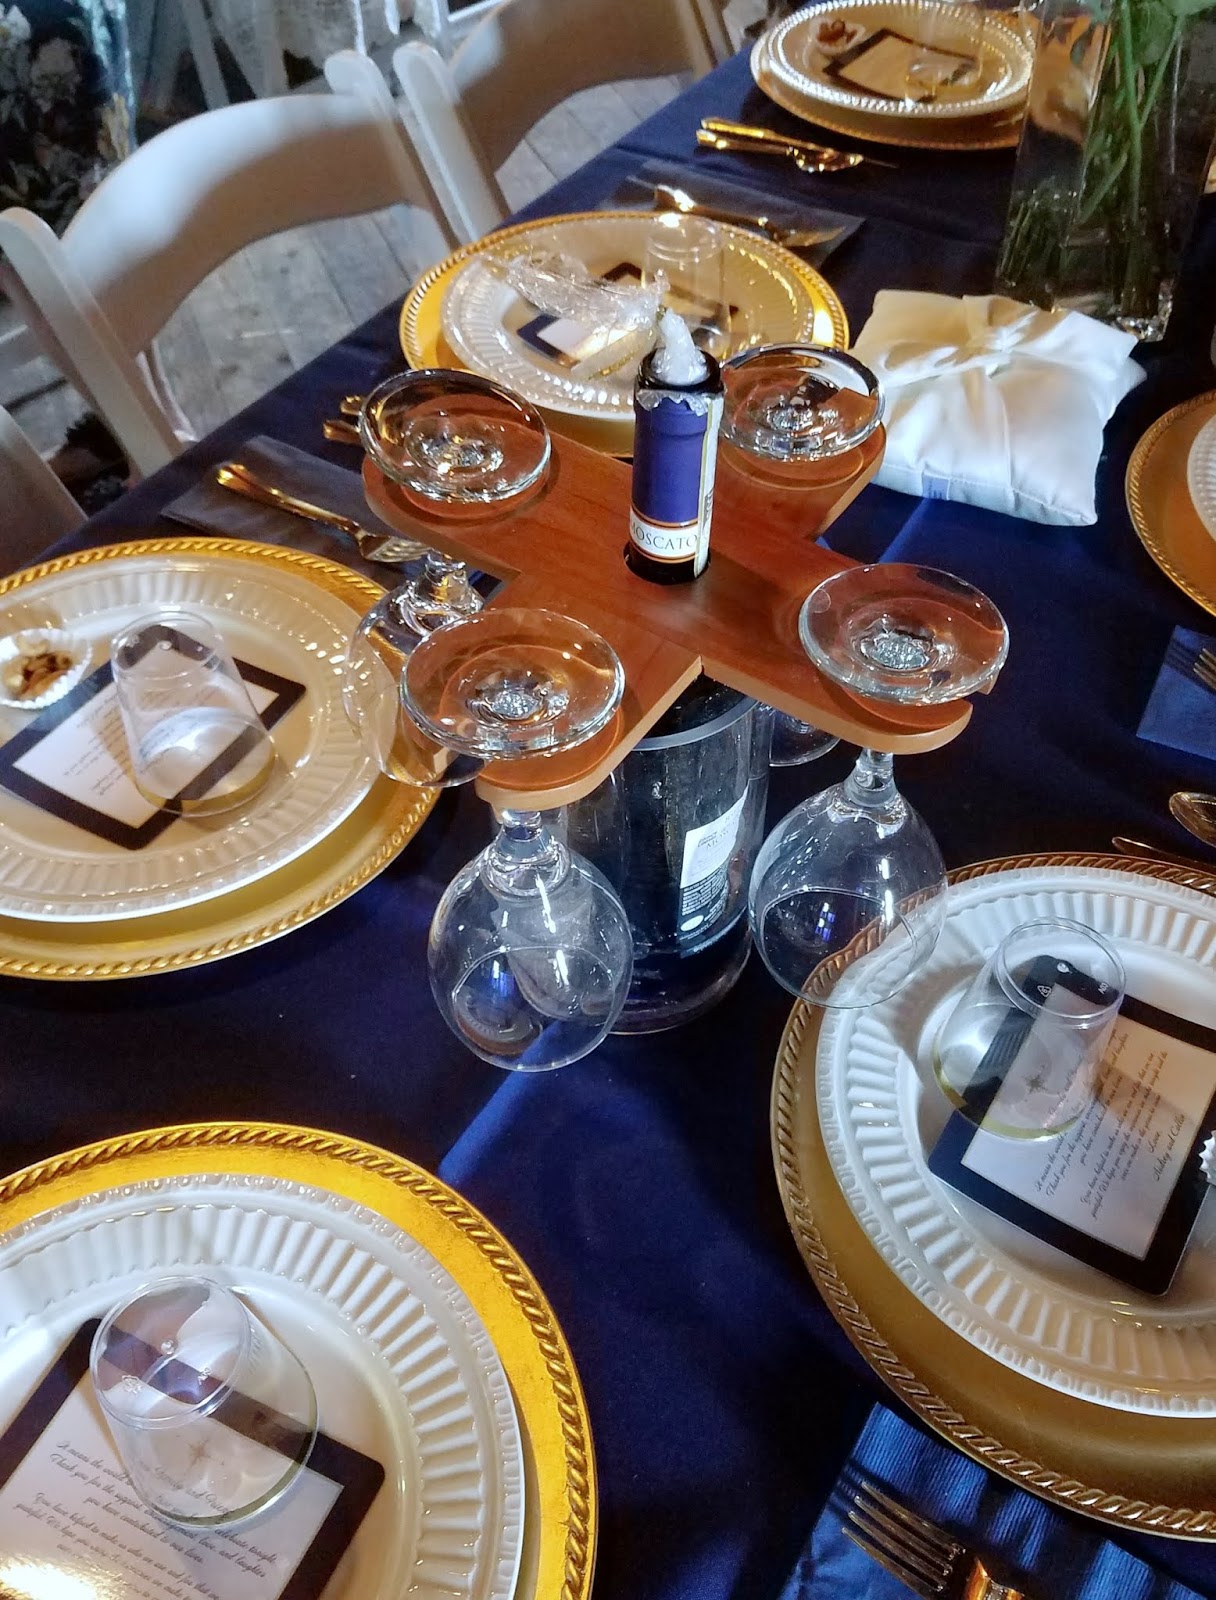 place settings on table with gold chargers and white bottle with homemade wooden wine glass holders.